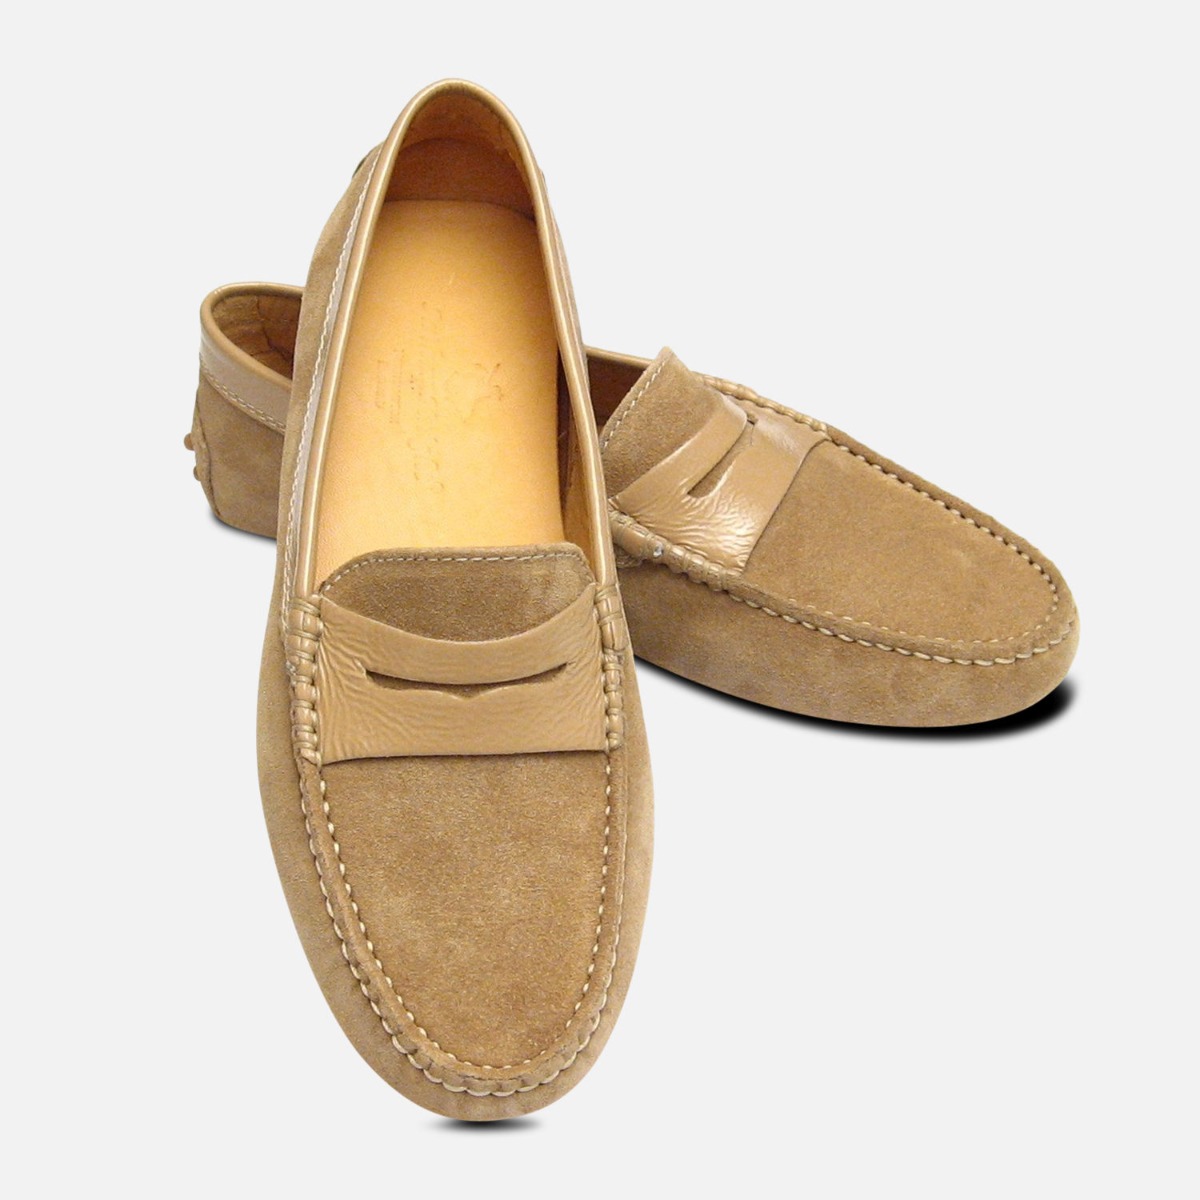 moccasins for ladies